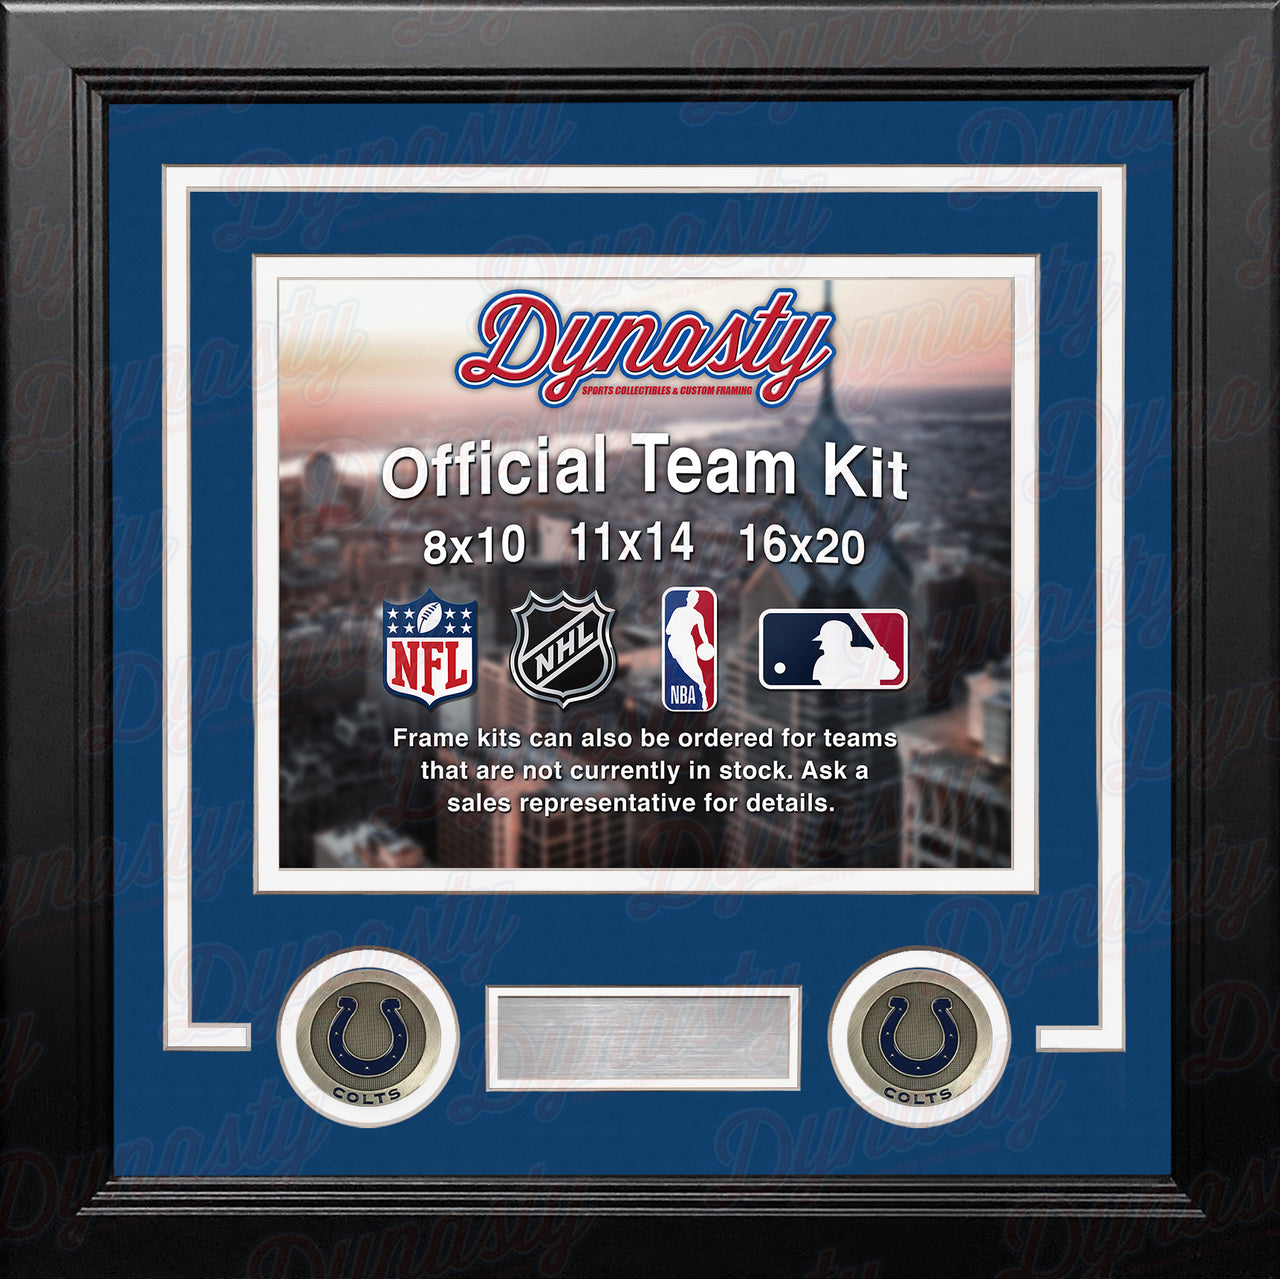 NFL Football Photo Picture Frame Kit - Indianapolis Colts (Blue Matting, White Trim) - Dynasty Sports & Framing 